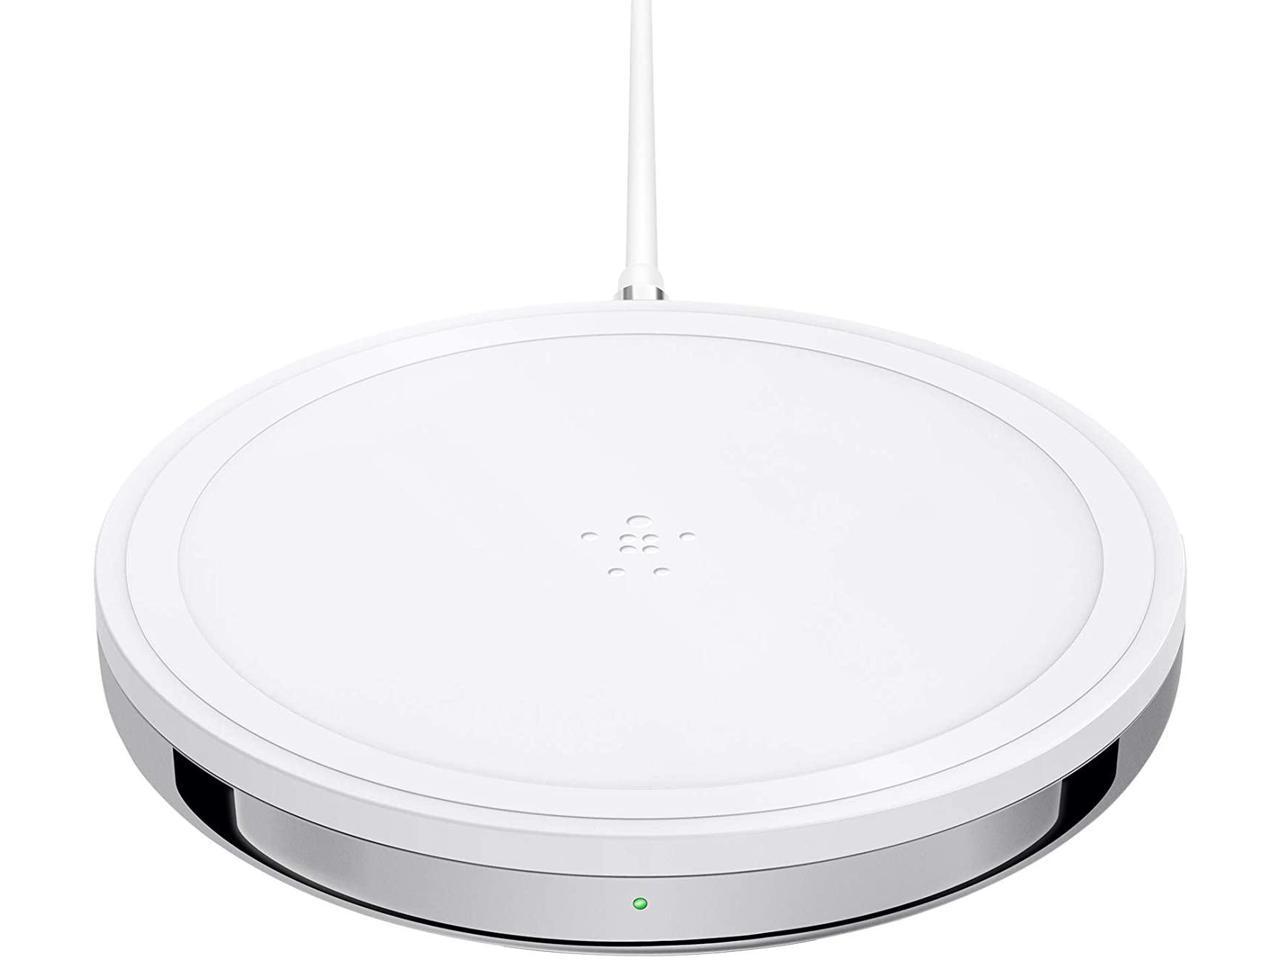 BOOSTUP WIRELESS CHARGER STAD FAST APL SMSG WHITE